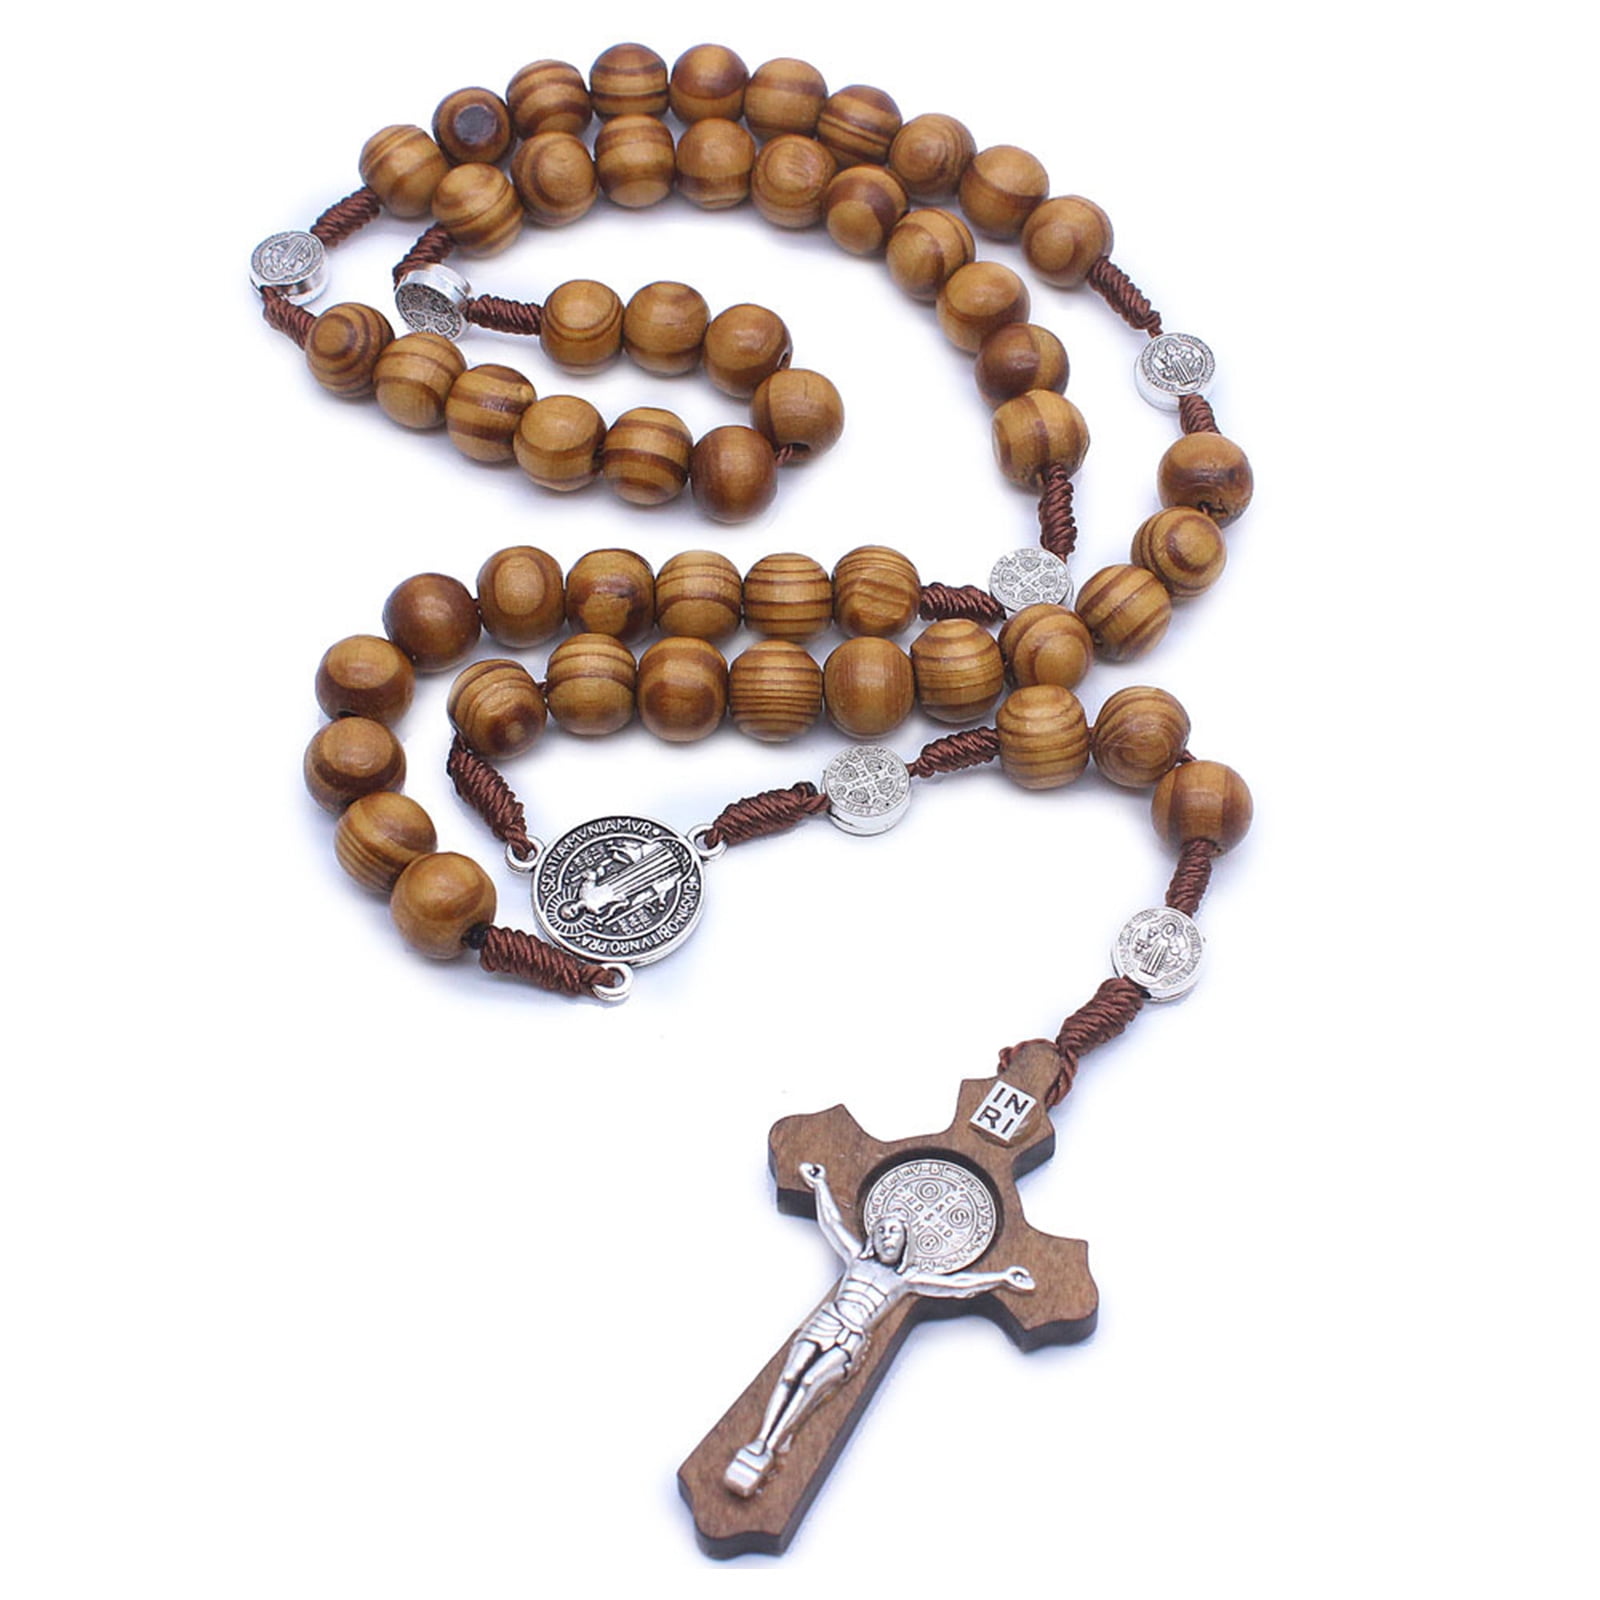 359pcs Cross Charms Rosary Jewelry Making Wood Beads Rosaries Tibetan  Pendant and Spacer Beads for Easter Eid Mubarak Ramadan Necklace Bracelet  Earrings Rosary Making Bead Supplies 